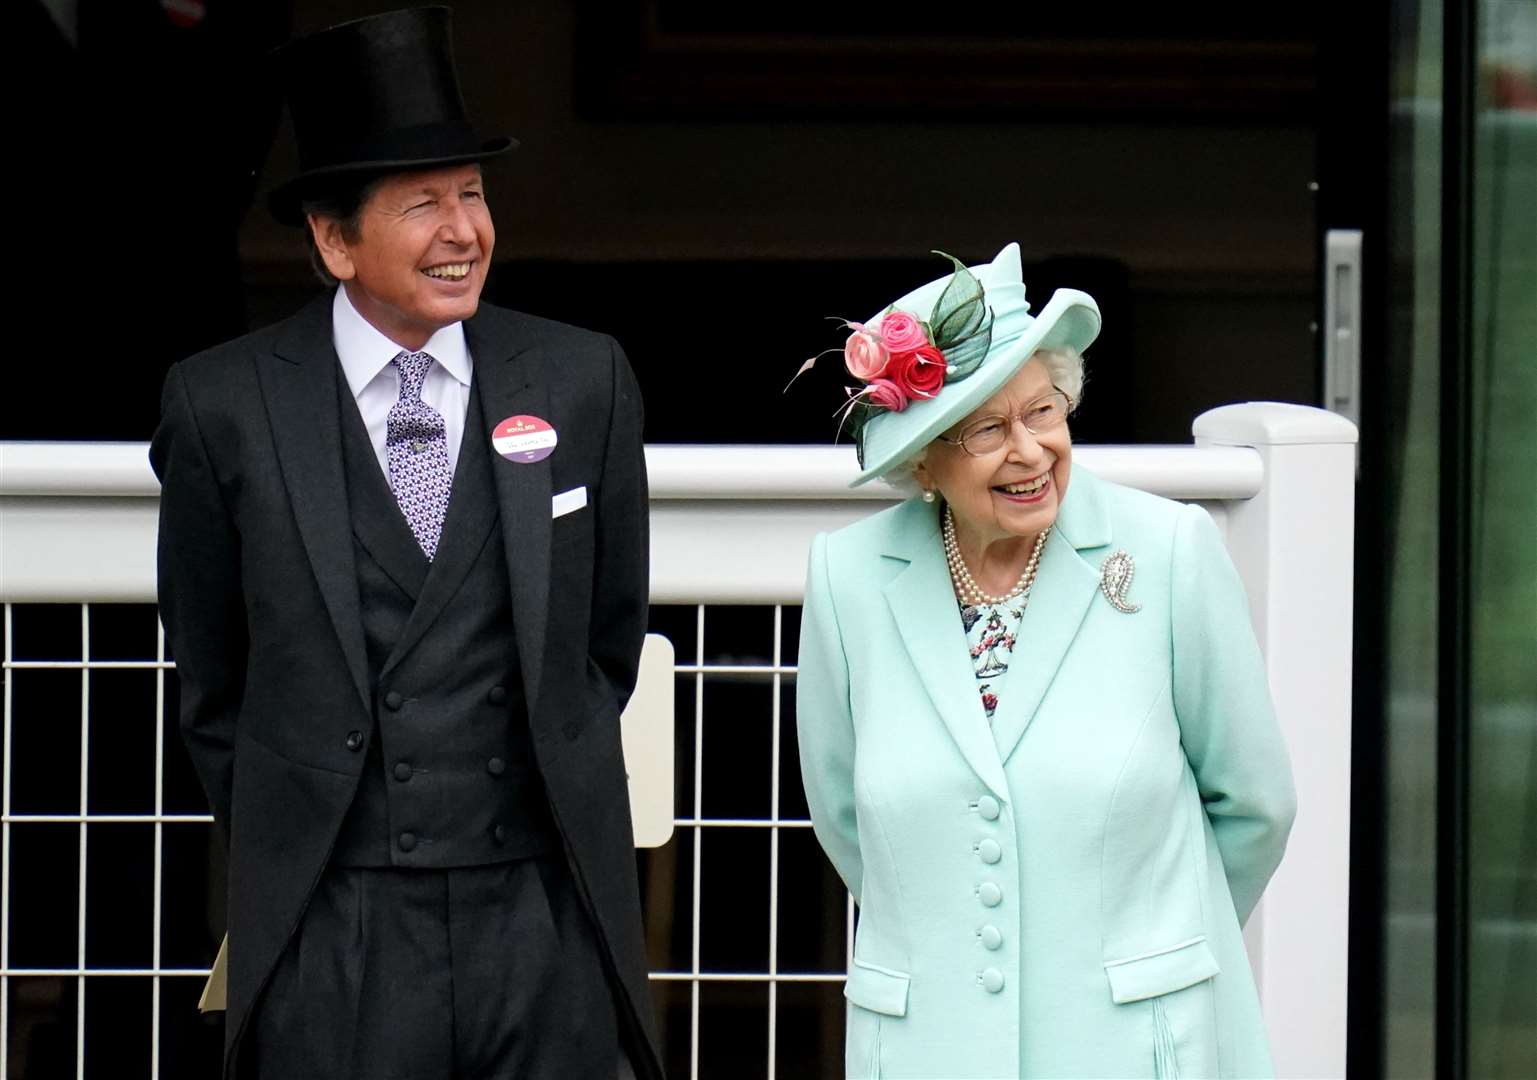 Racing manager John Warren joins the Queen during day five at Ascot (Andrew Matthews/PA)